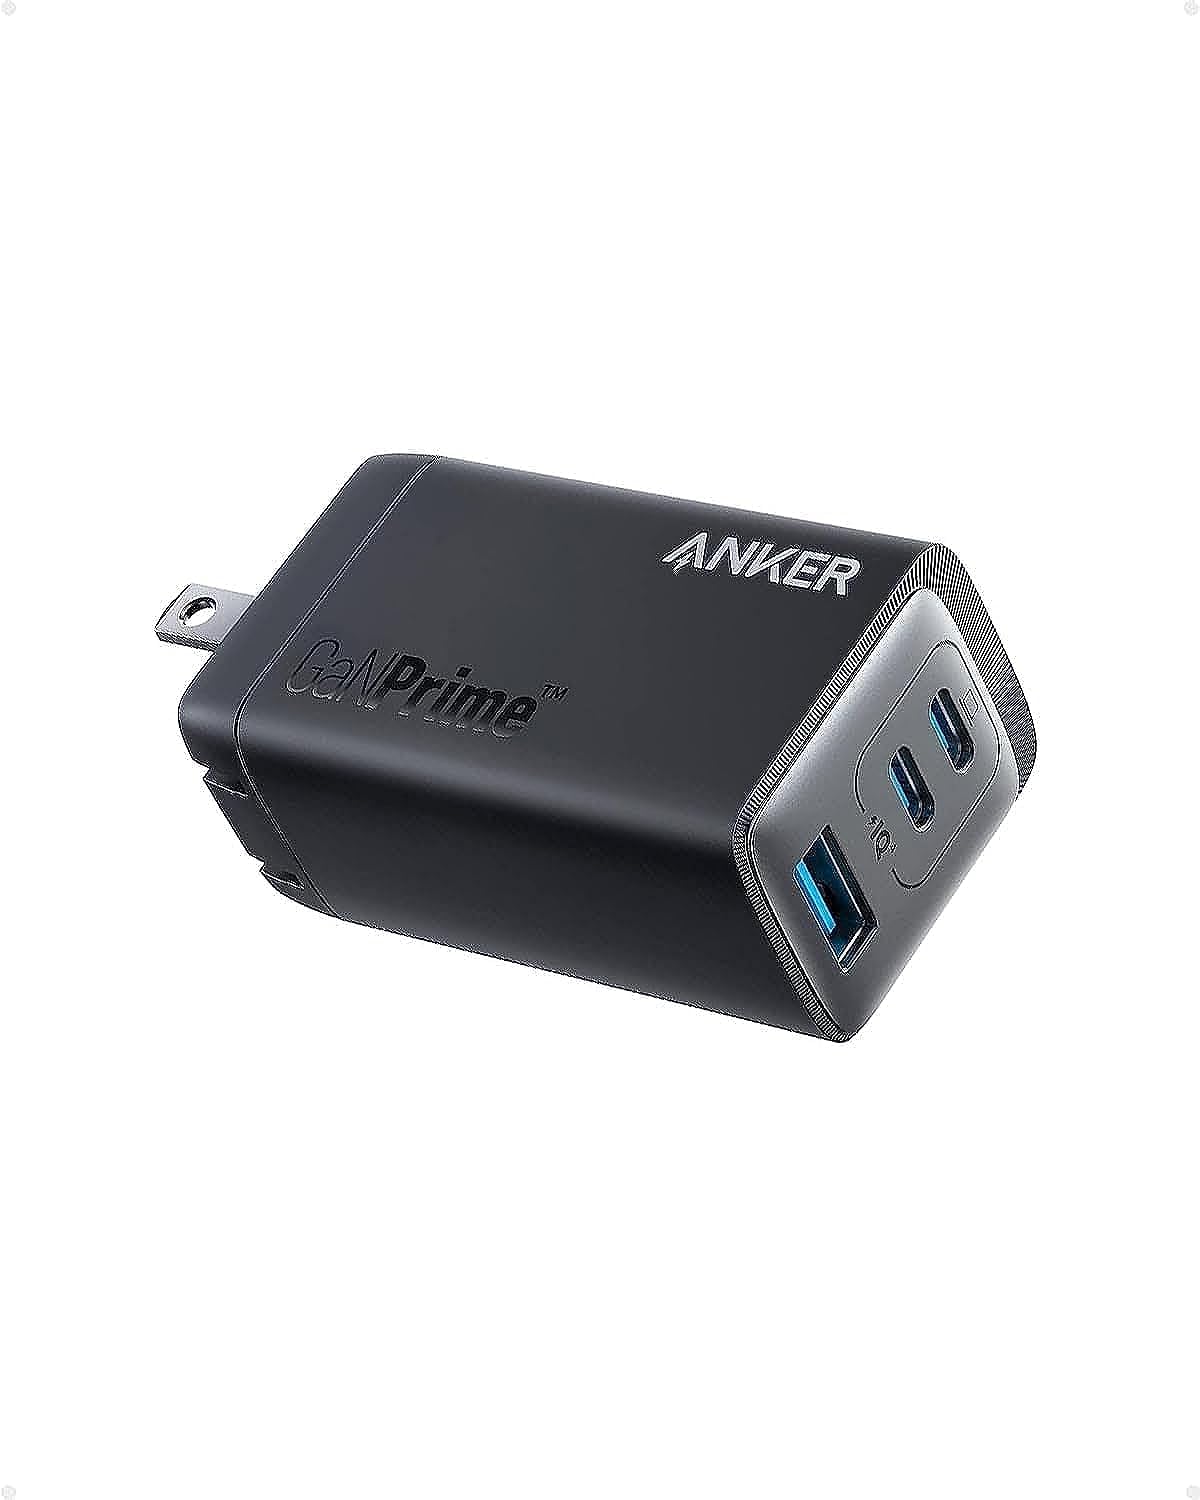 Anker 735 GaNPrime 65W Foldable Fast Charger w/ 2x USB-C + 1x USB-A Ports $37.95 + Free Shipping